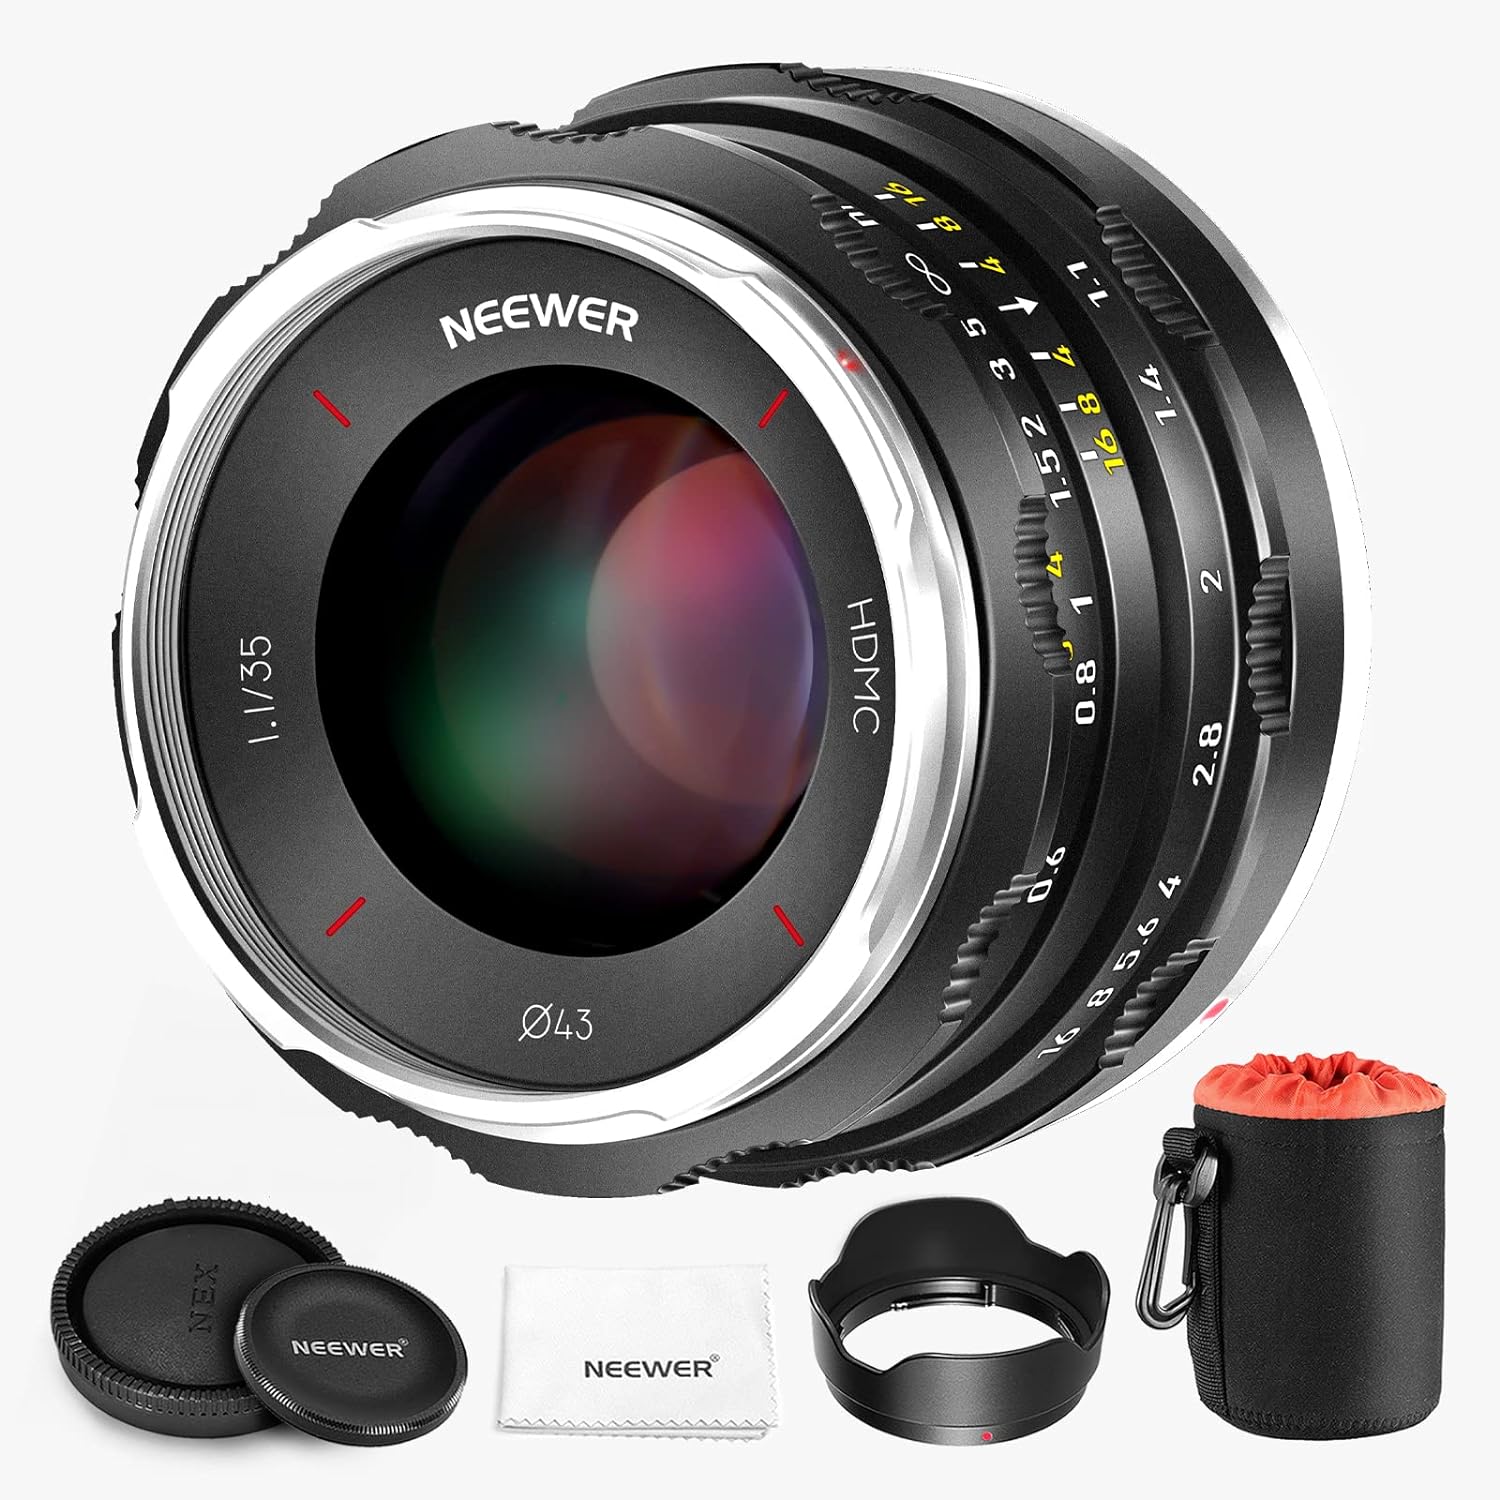 NEEWER 35mm f1.1 APS-C Large Aperture Manual Focus Prime Lens Compatible with Sony E Mount Cameras A7III A7 A7S A7R II A7S II A9 A7R IV A9 II A7S III A7C A7R V A1 FX30 ZV-E10 A6400 A6600